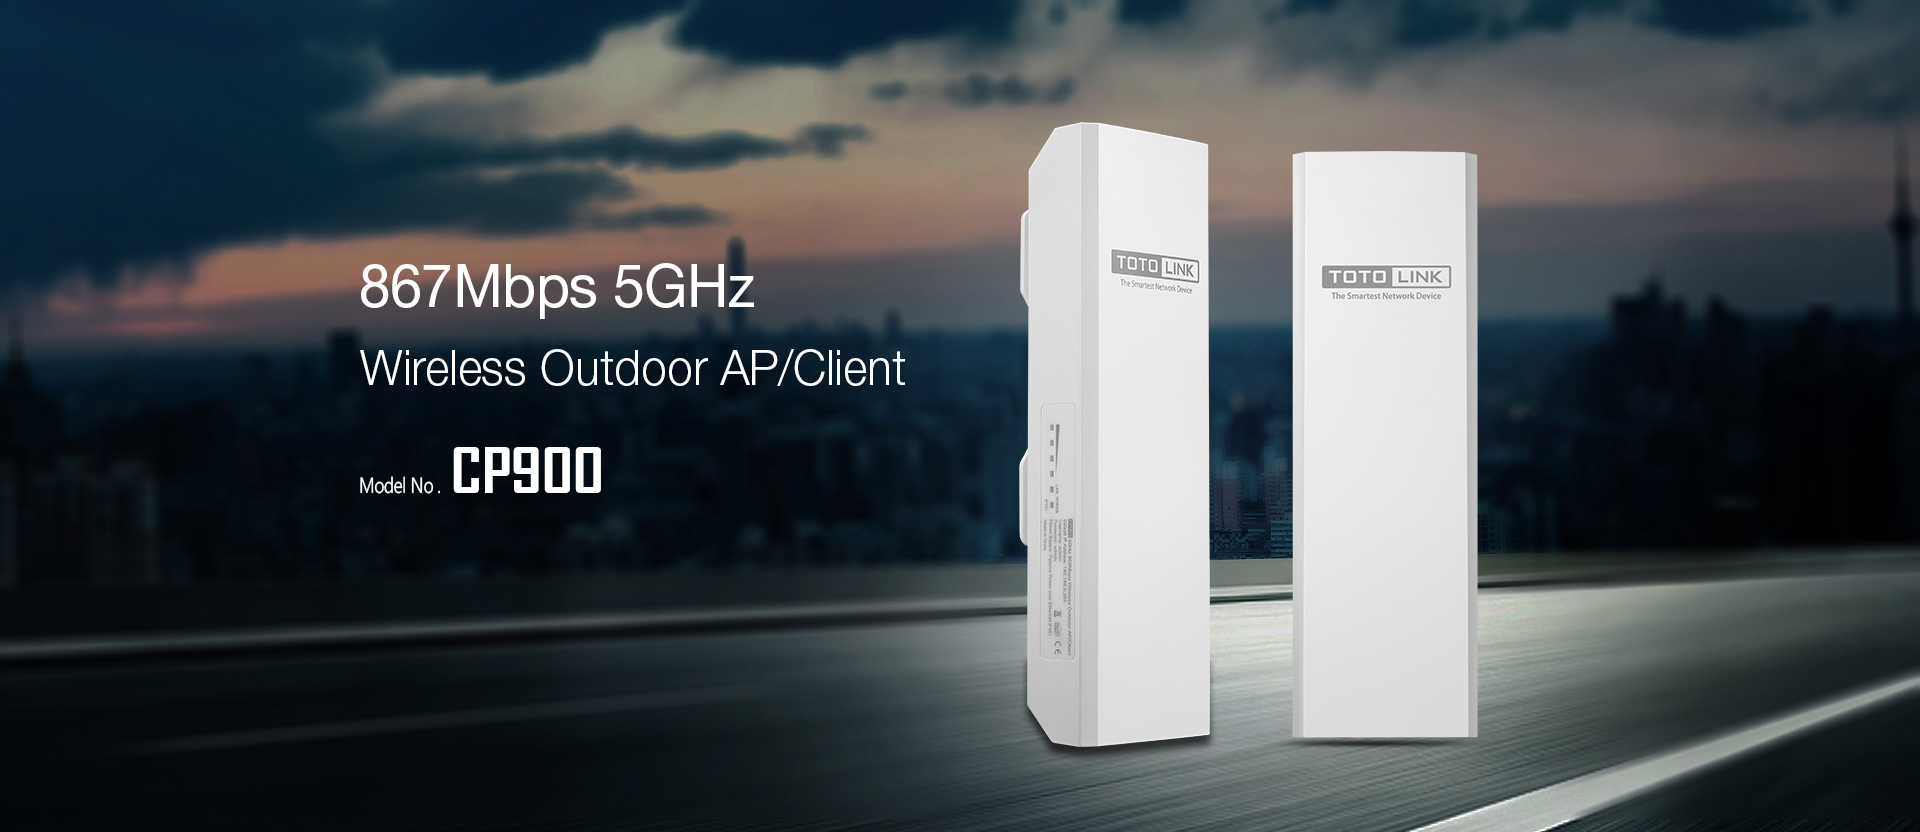 CP900-867Mbps-5GHz-Wireless-Outdoor-AP-Client